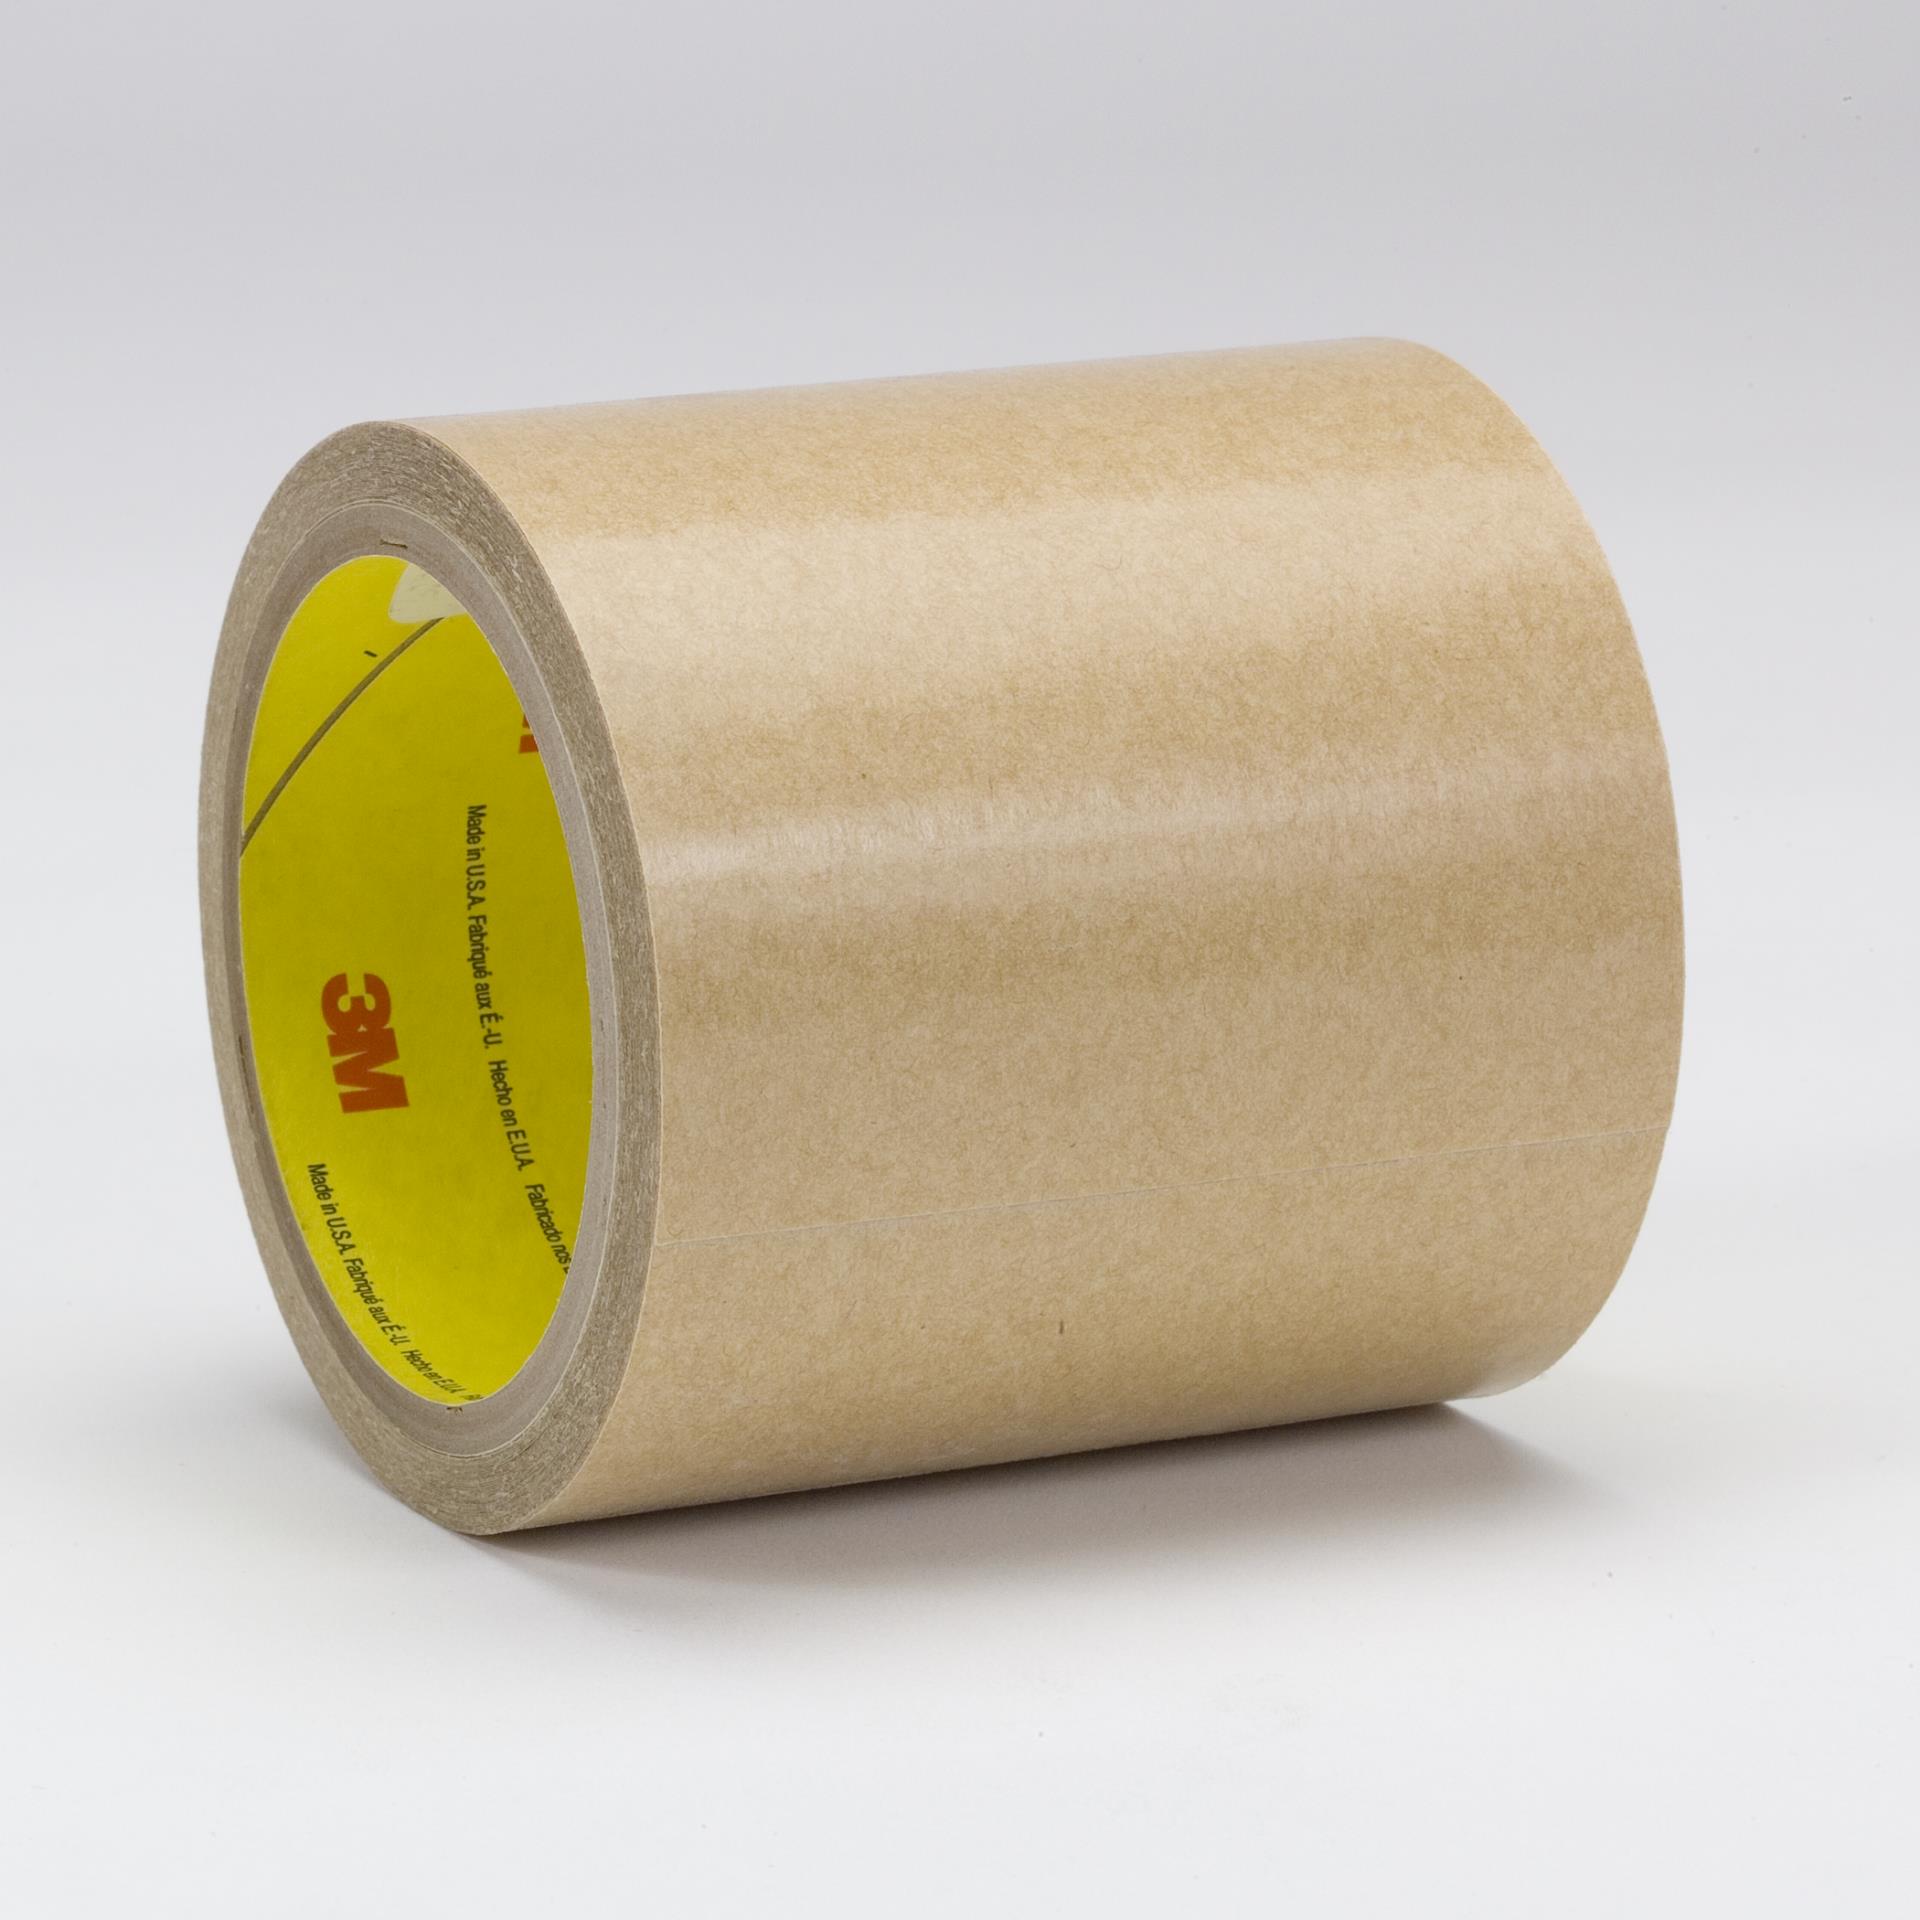 CASE of 6 0.75 Wide 3M 3/4-5-9490LE Pack of 6 5 yd Adhesive Transfer Tape 9490LE Length 